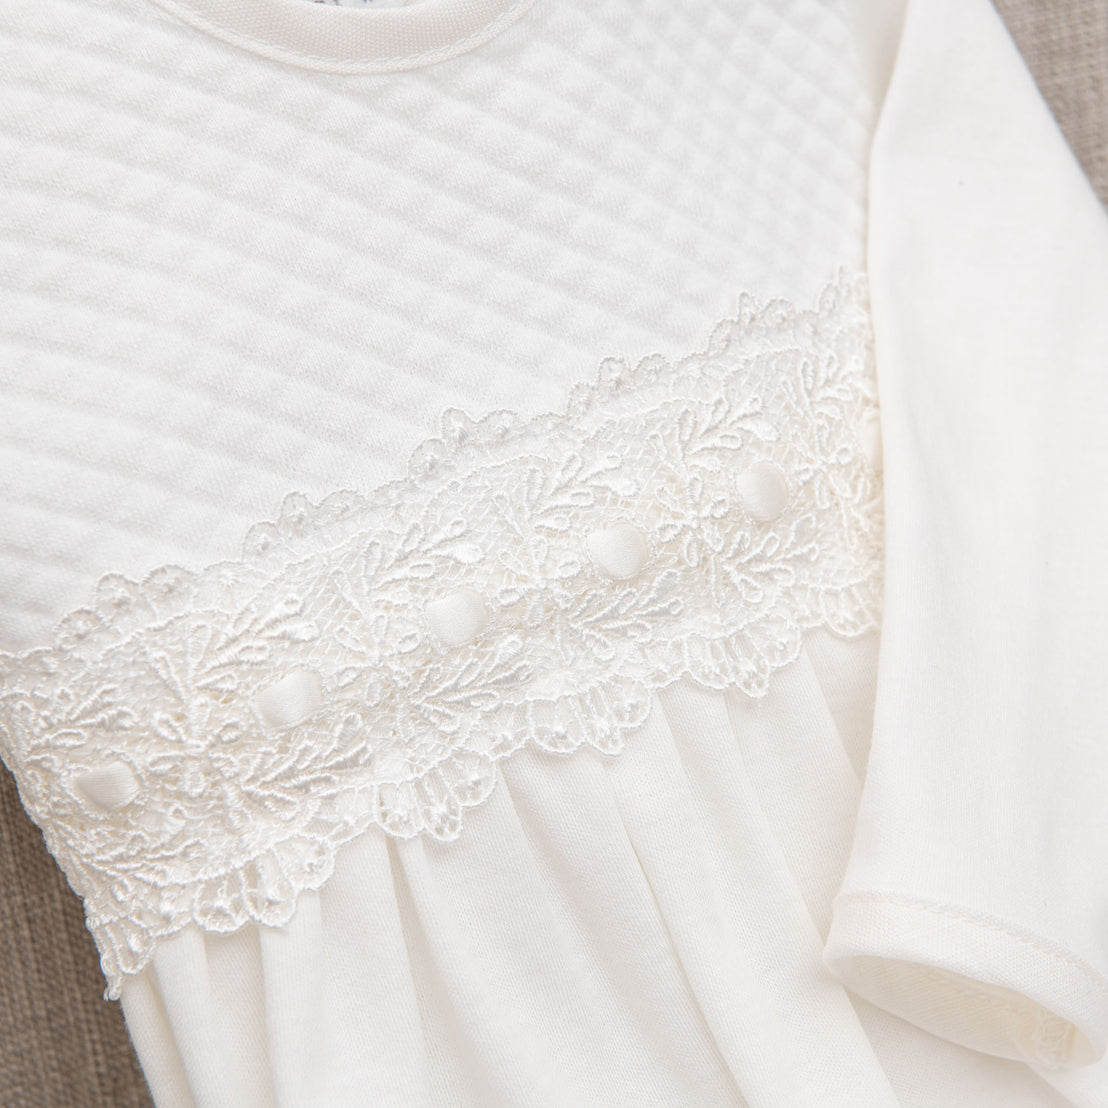 Close-up of a white lace detail on Madeline Newborn Gown, accenting the neckline and sleeves, against a soft grey background.